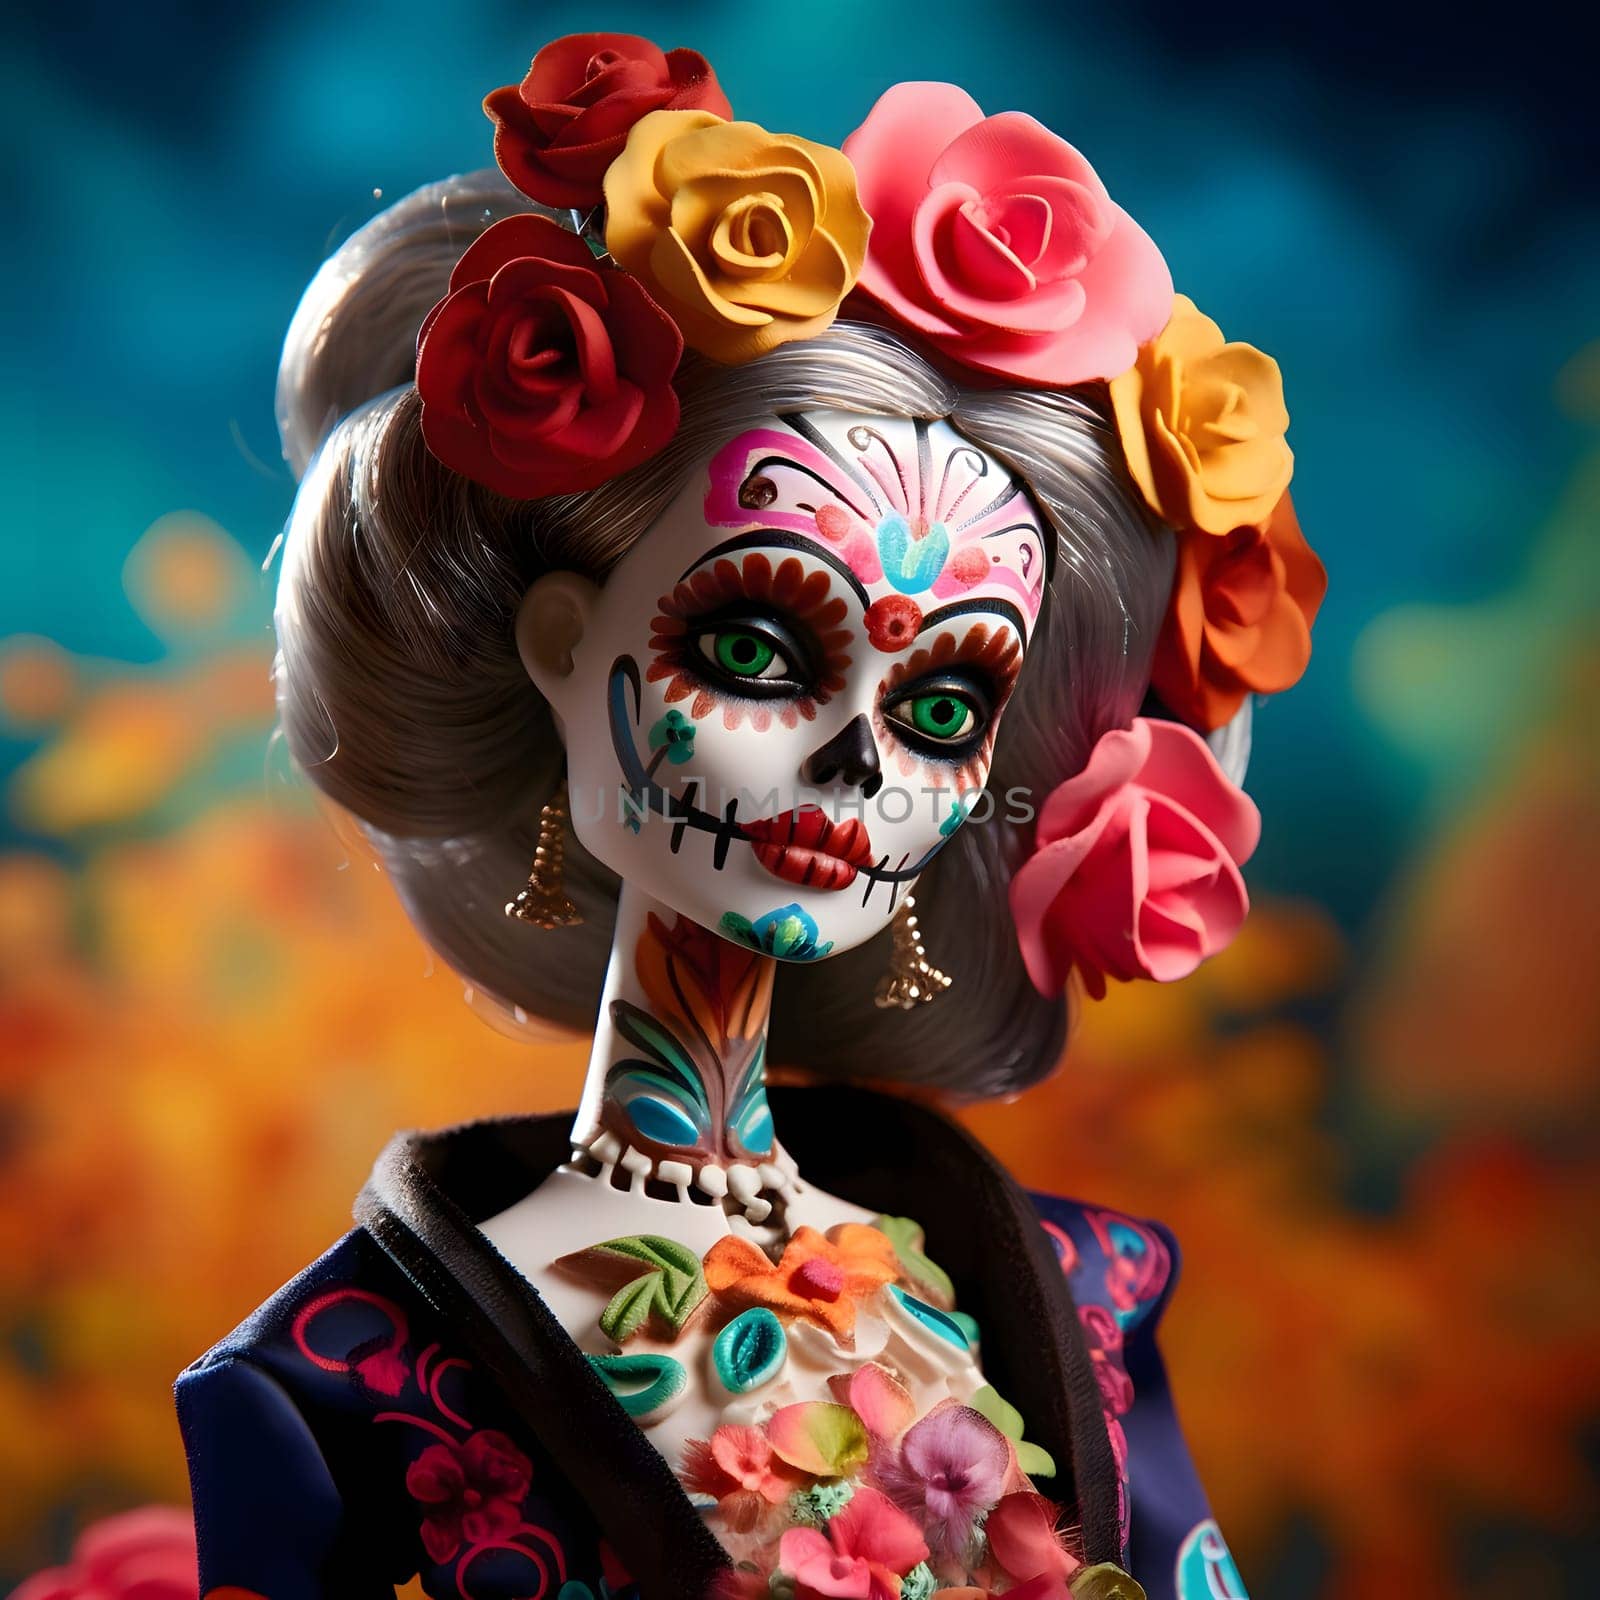 Woman with decorated painted face, elegant party outfit, roses flowers in hair, blurred background. For the day of the dead and Halloween. by ThemesS